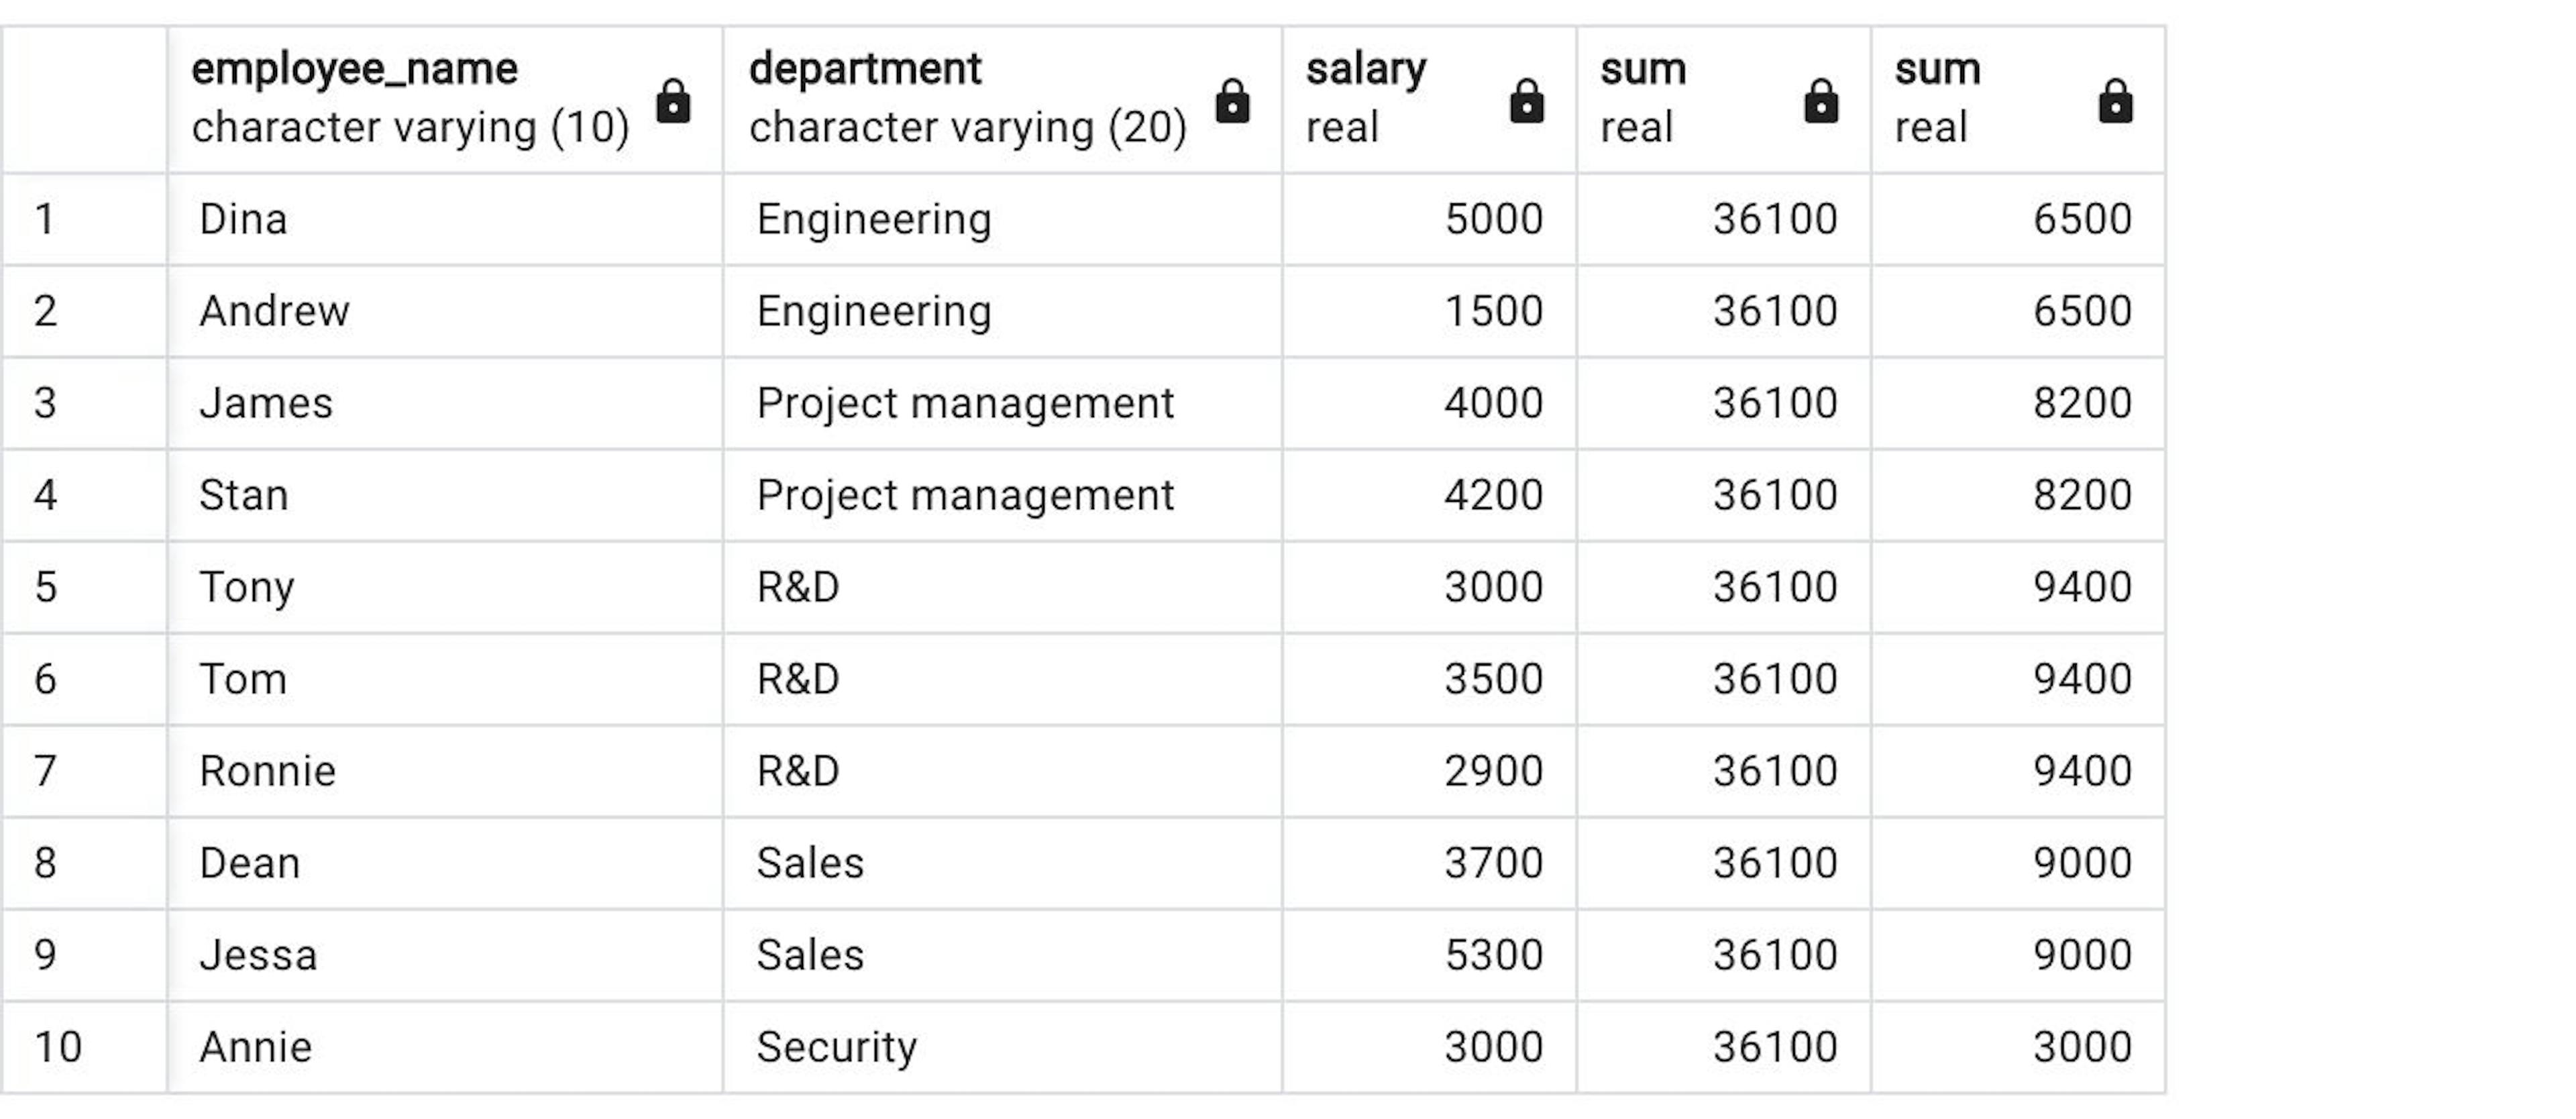 The Engineering Department's employees have a salary of 6500, the PM Department has a salary of 8200, R&D – 9400, Sales – 9000, and Security Department – 3000.